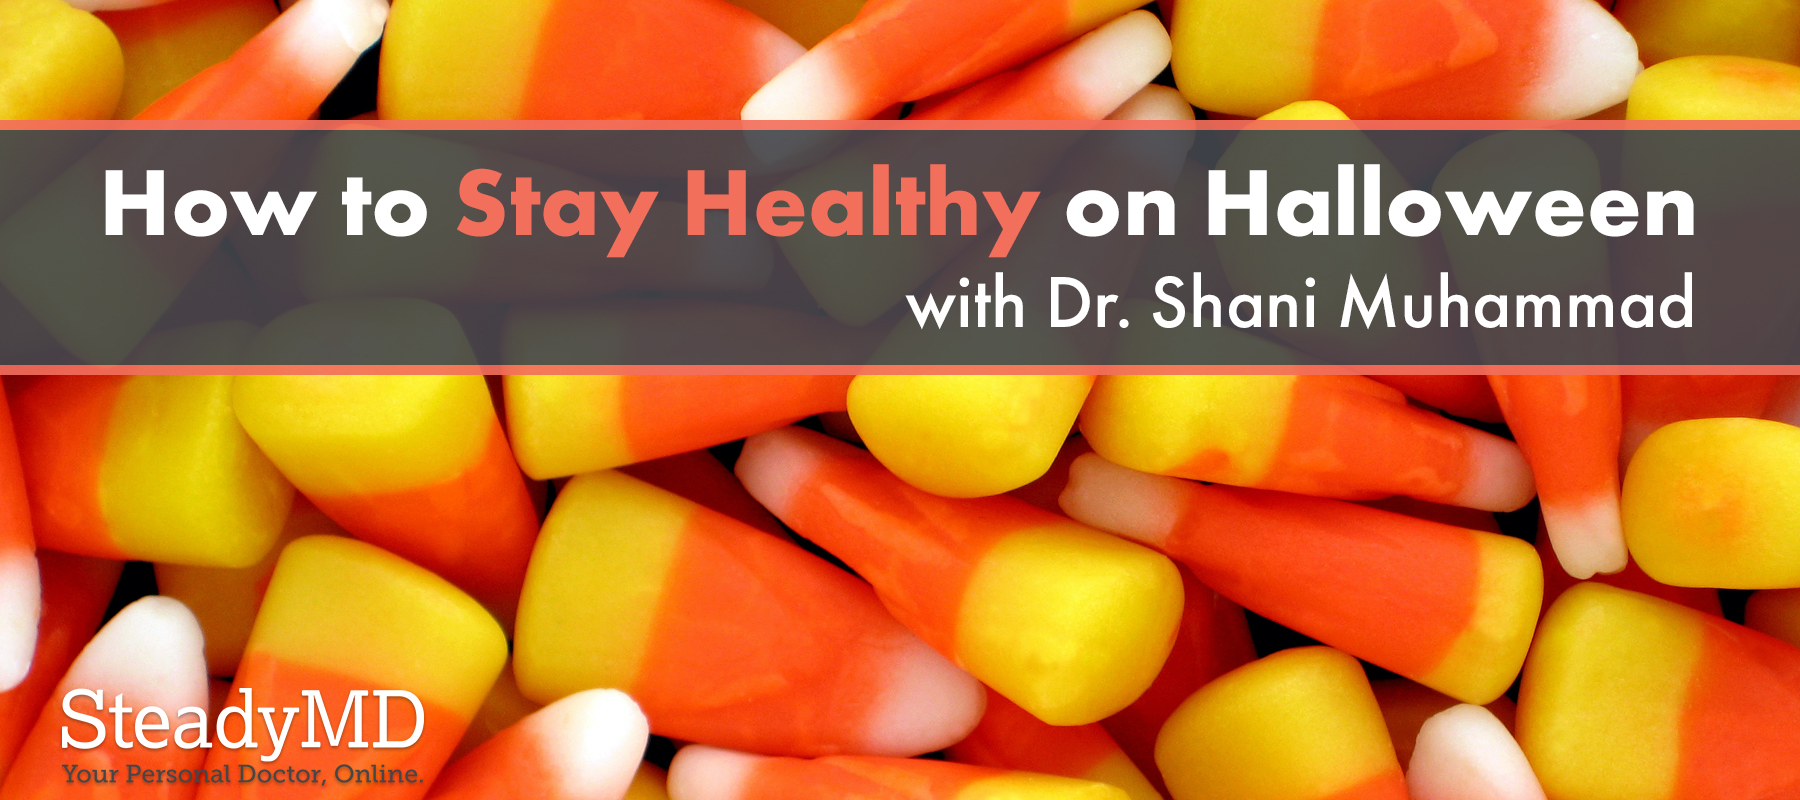 How to Stay Healthy on Halloween